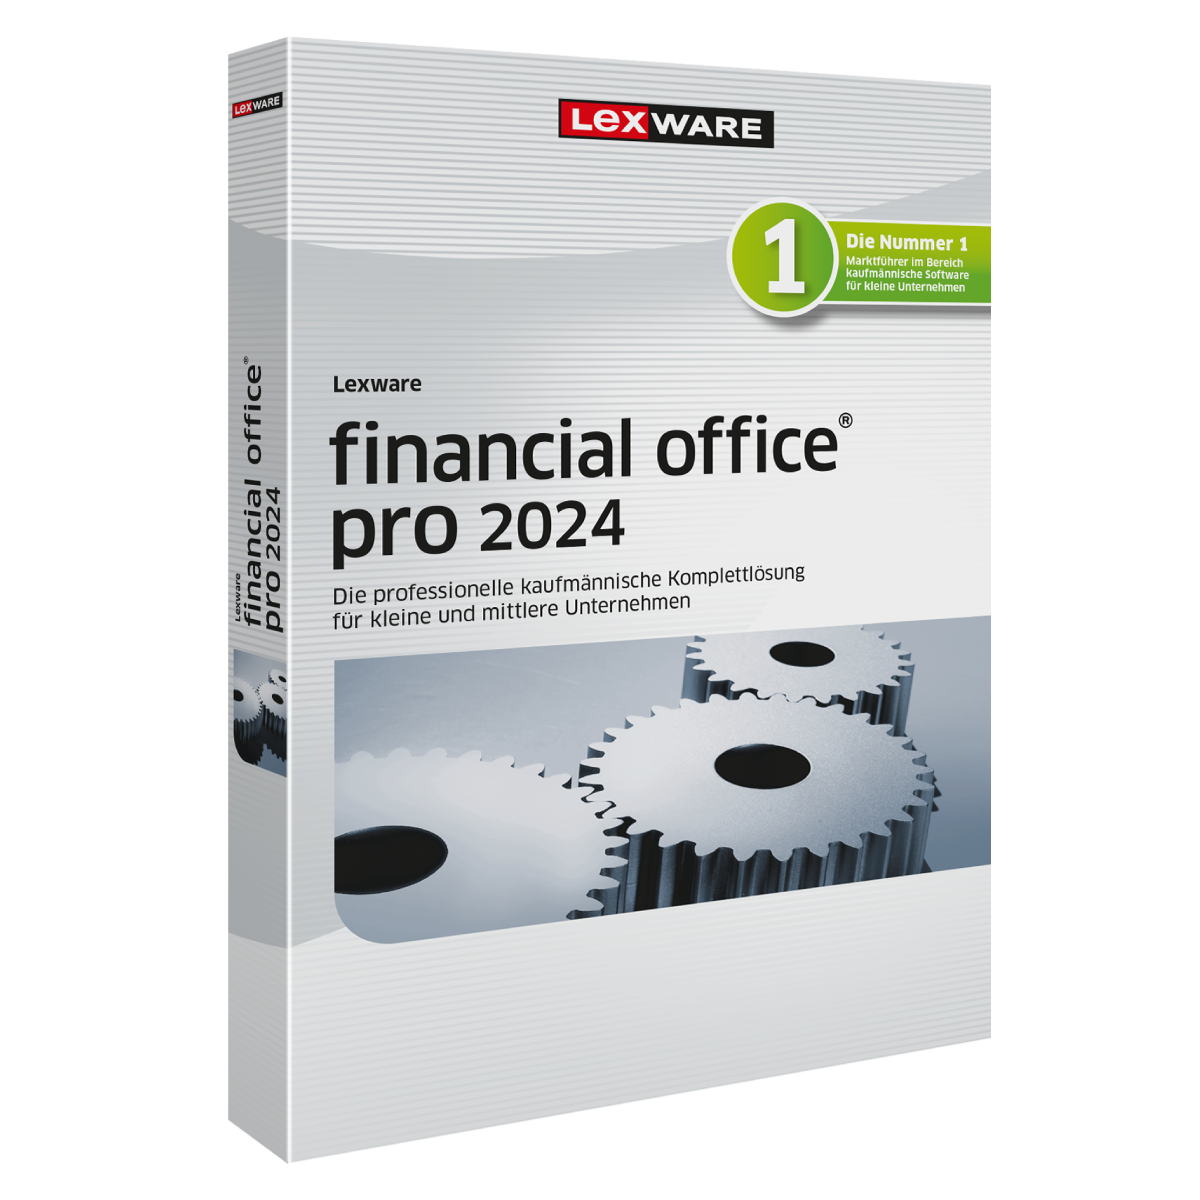 LEXWARE financial office pro 2024 - Abo [Download]